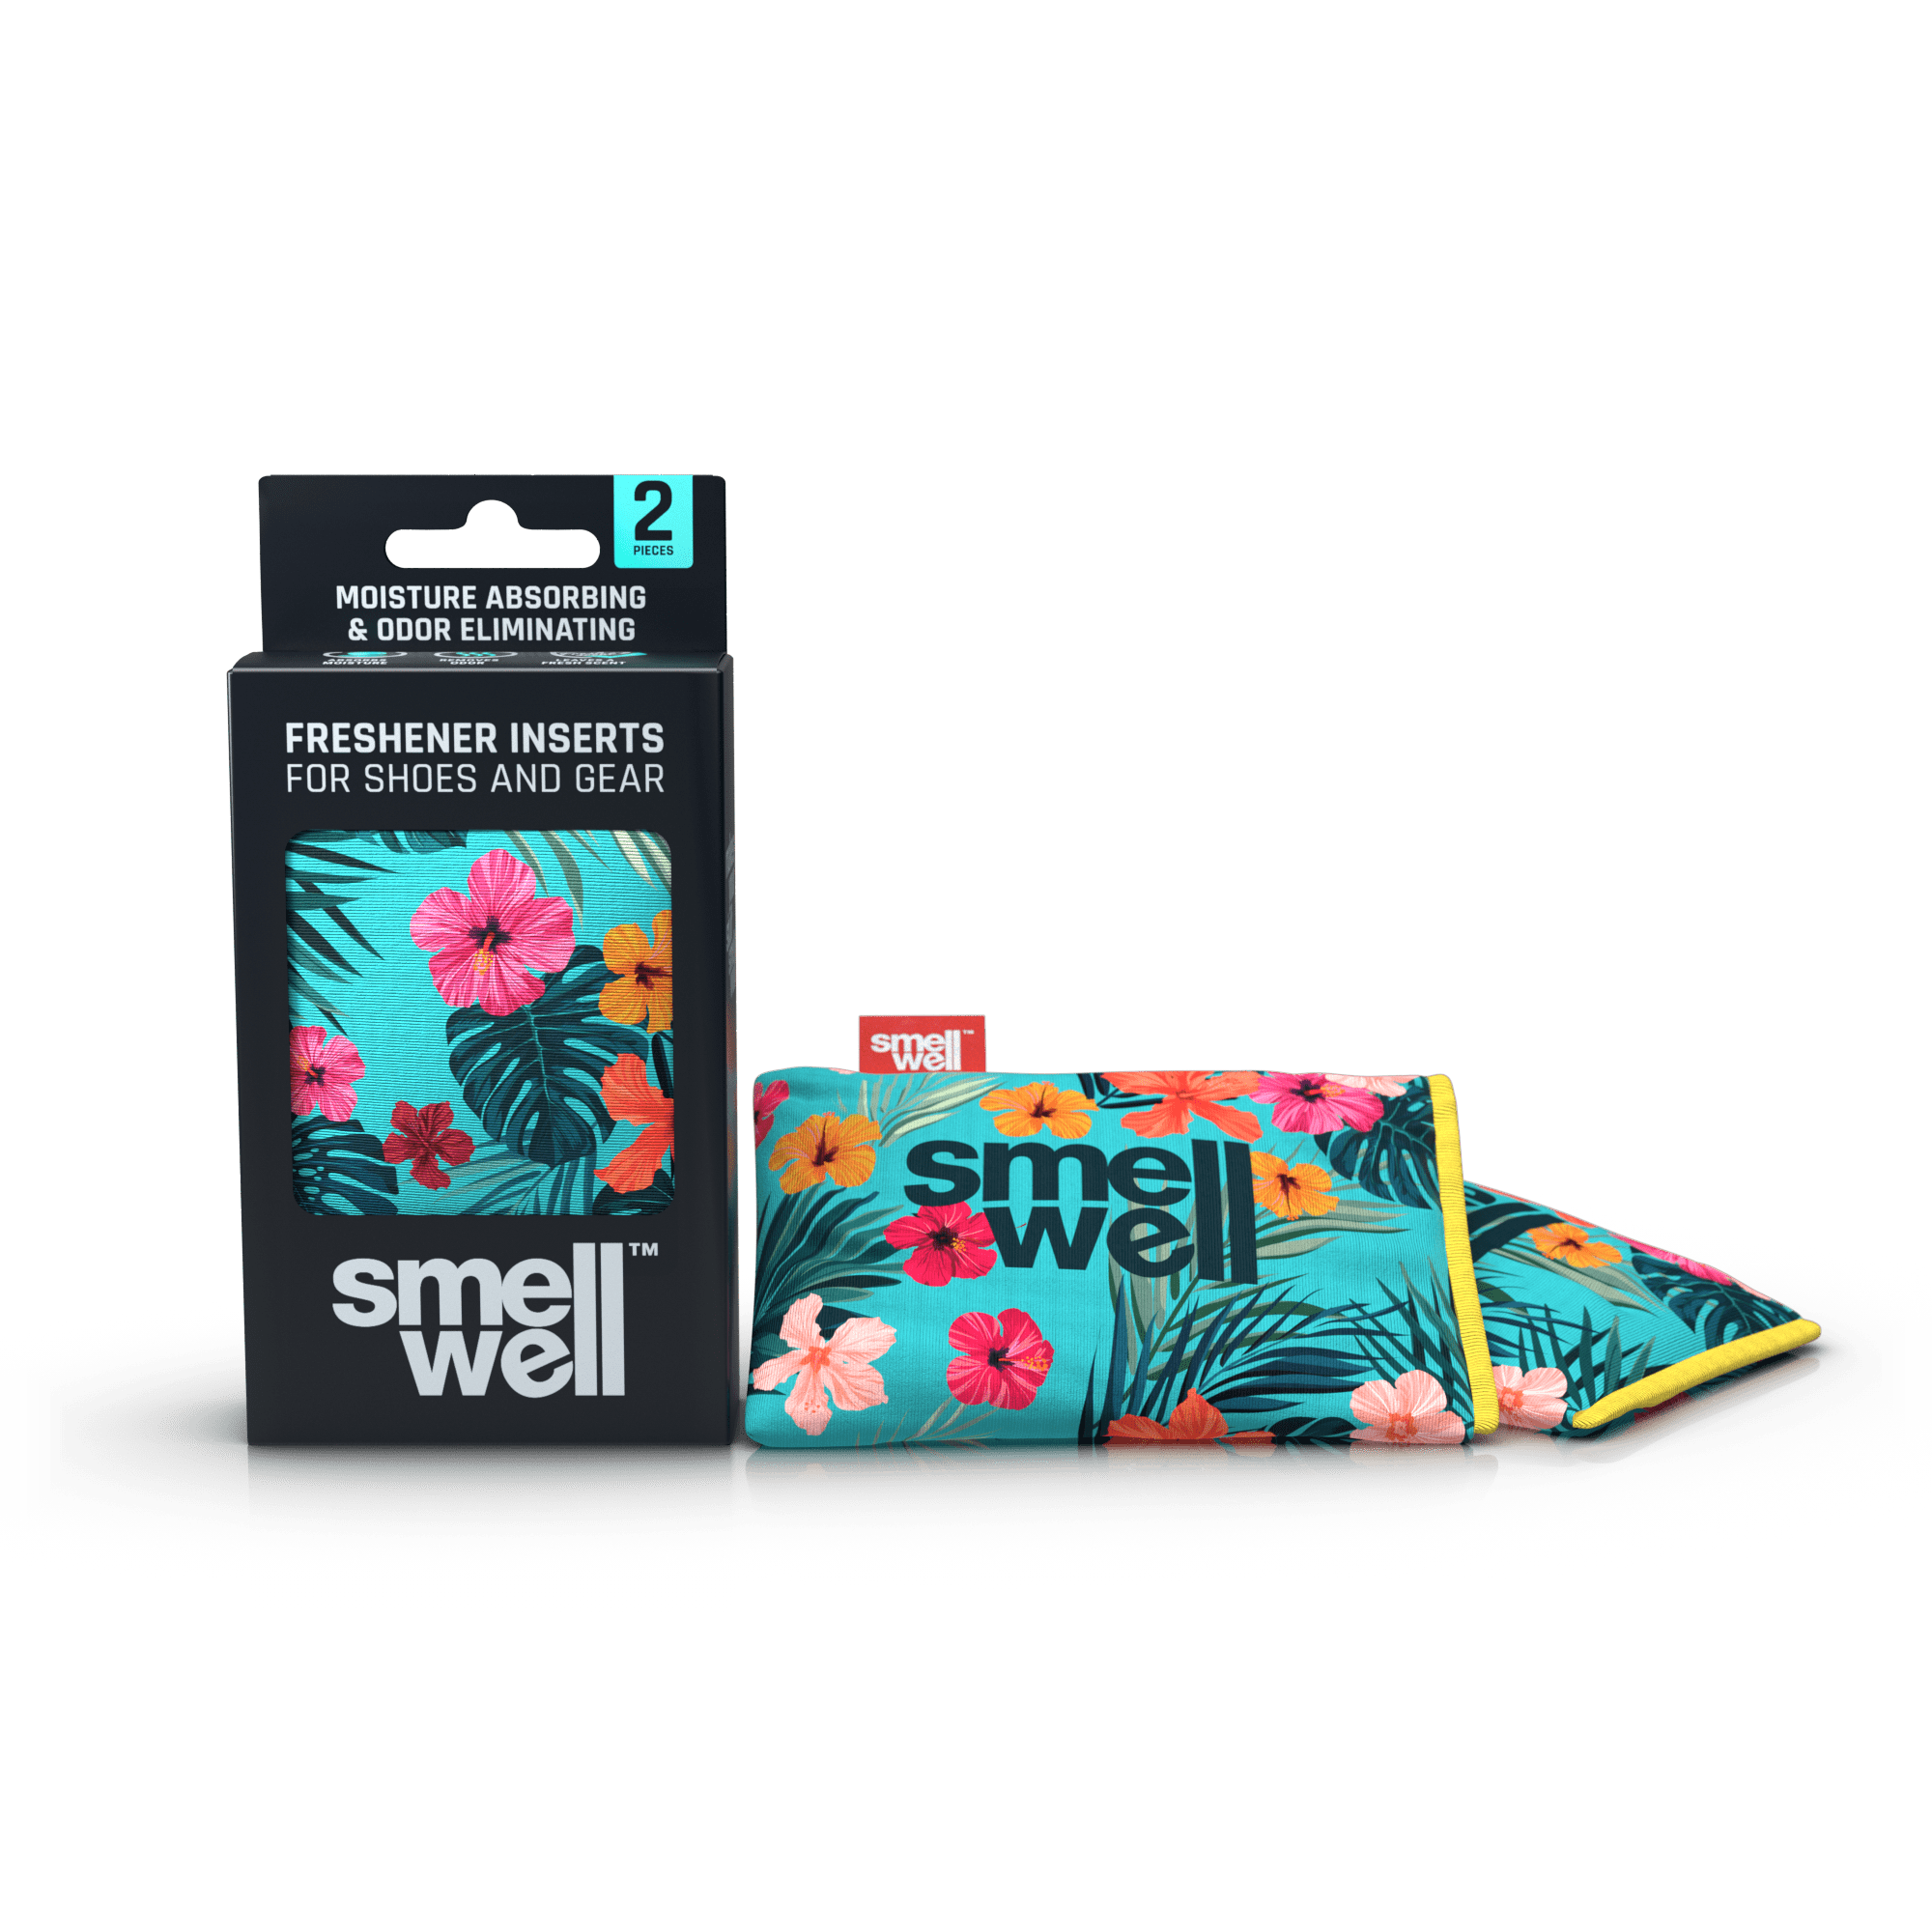 A package of SmellWell Active - Tropical Blue and 2 SmellWell Active - Tropical Blue freshener inserts bags next to it